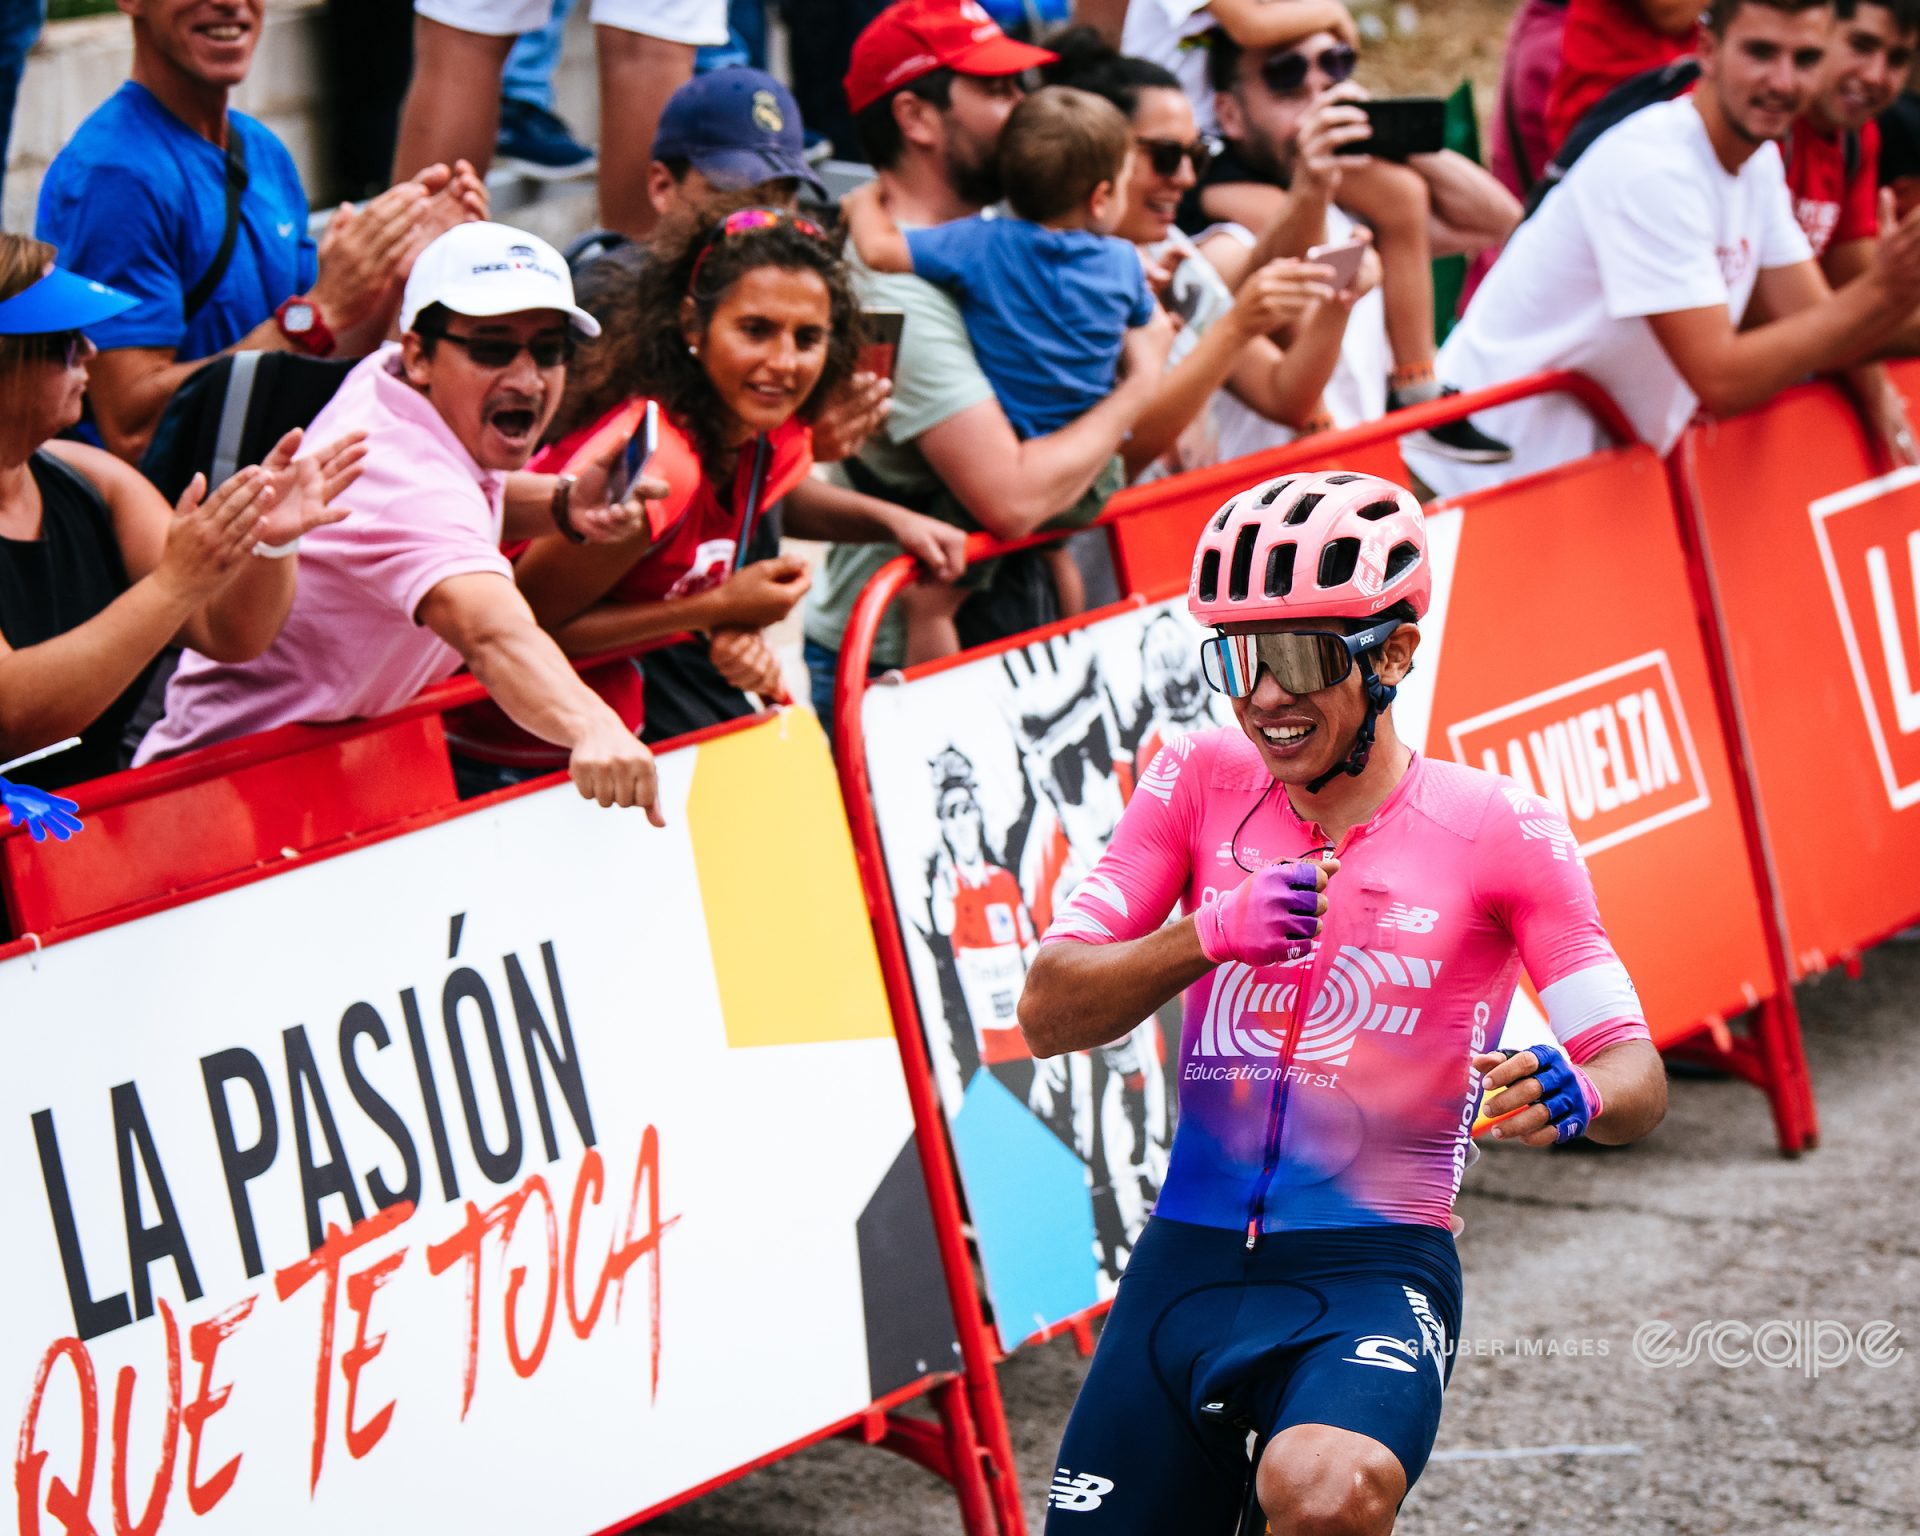 Sergio Higuita crosses the finish line to win stage 18 of the 2019 Vuelta a España. Higuita is wearing the distinctive pink jersey of his EF Education team and is pounding his chest as he crosses the line. Behind, fans lean over the barriers to cheer at him.